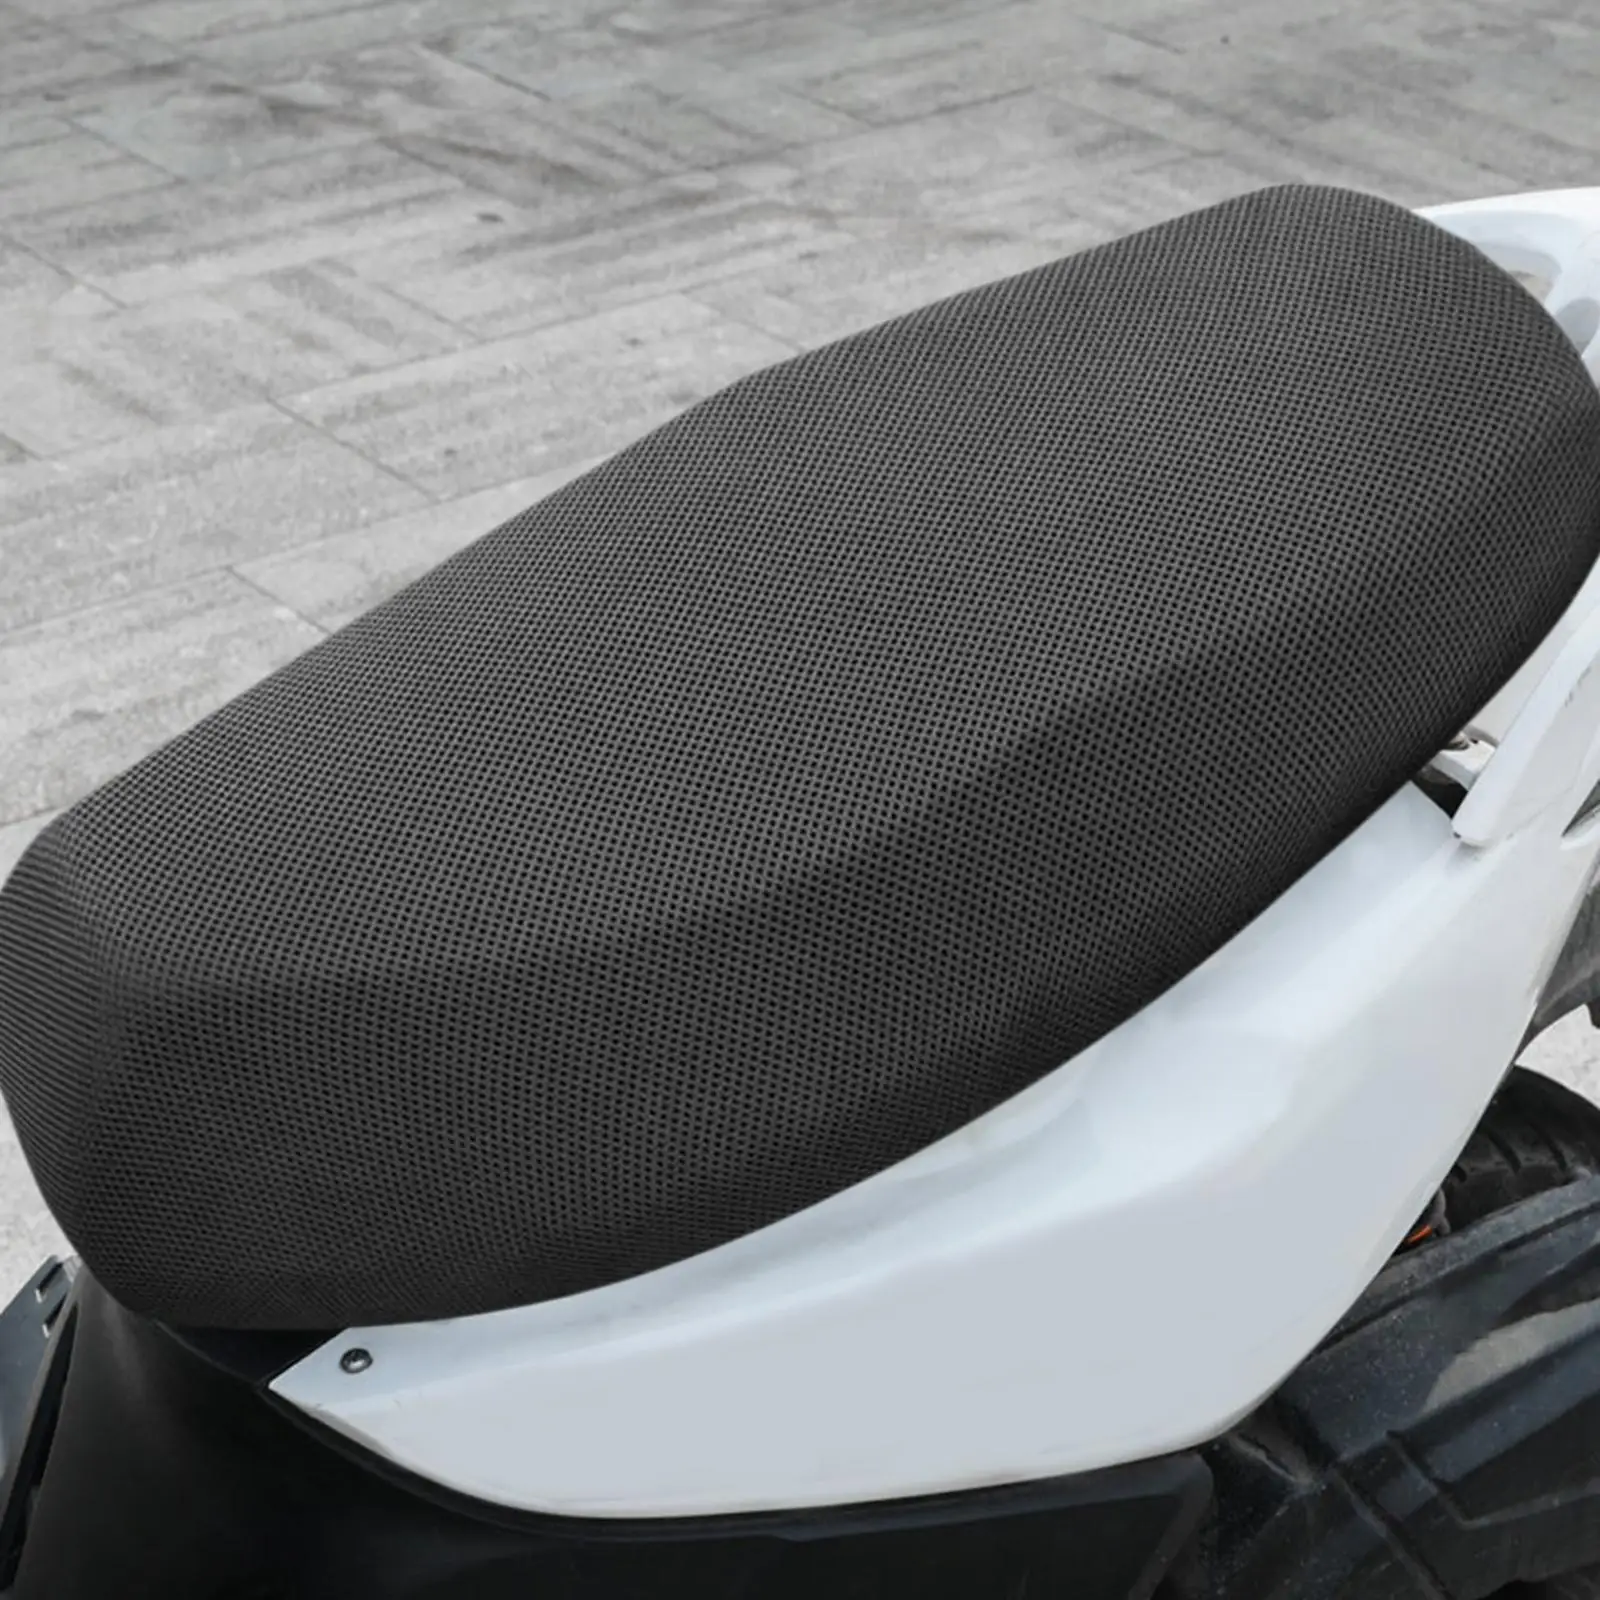 Universal Motorcycle Seat Cover, Elastic Anti Slip Comfortable Mesh Breathable for Motorbike Scooters